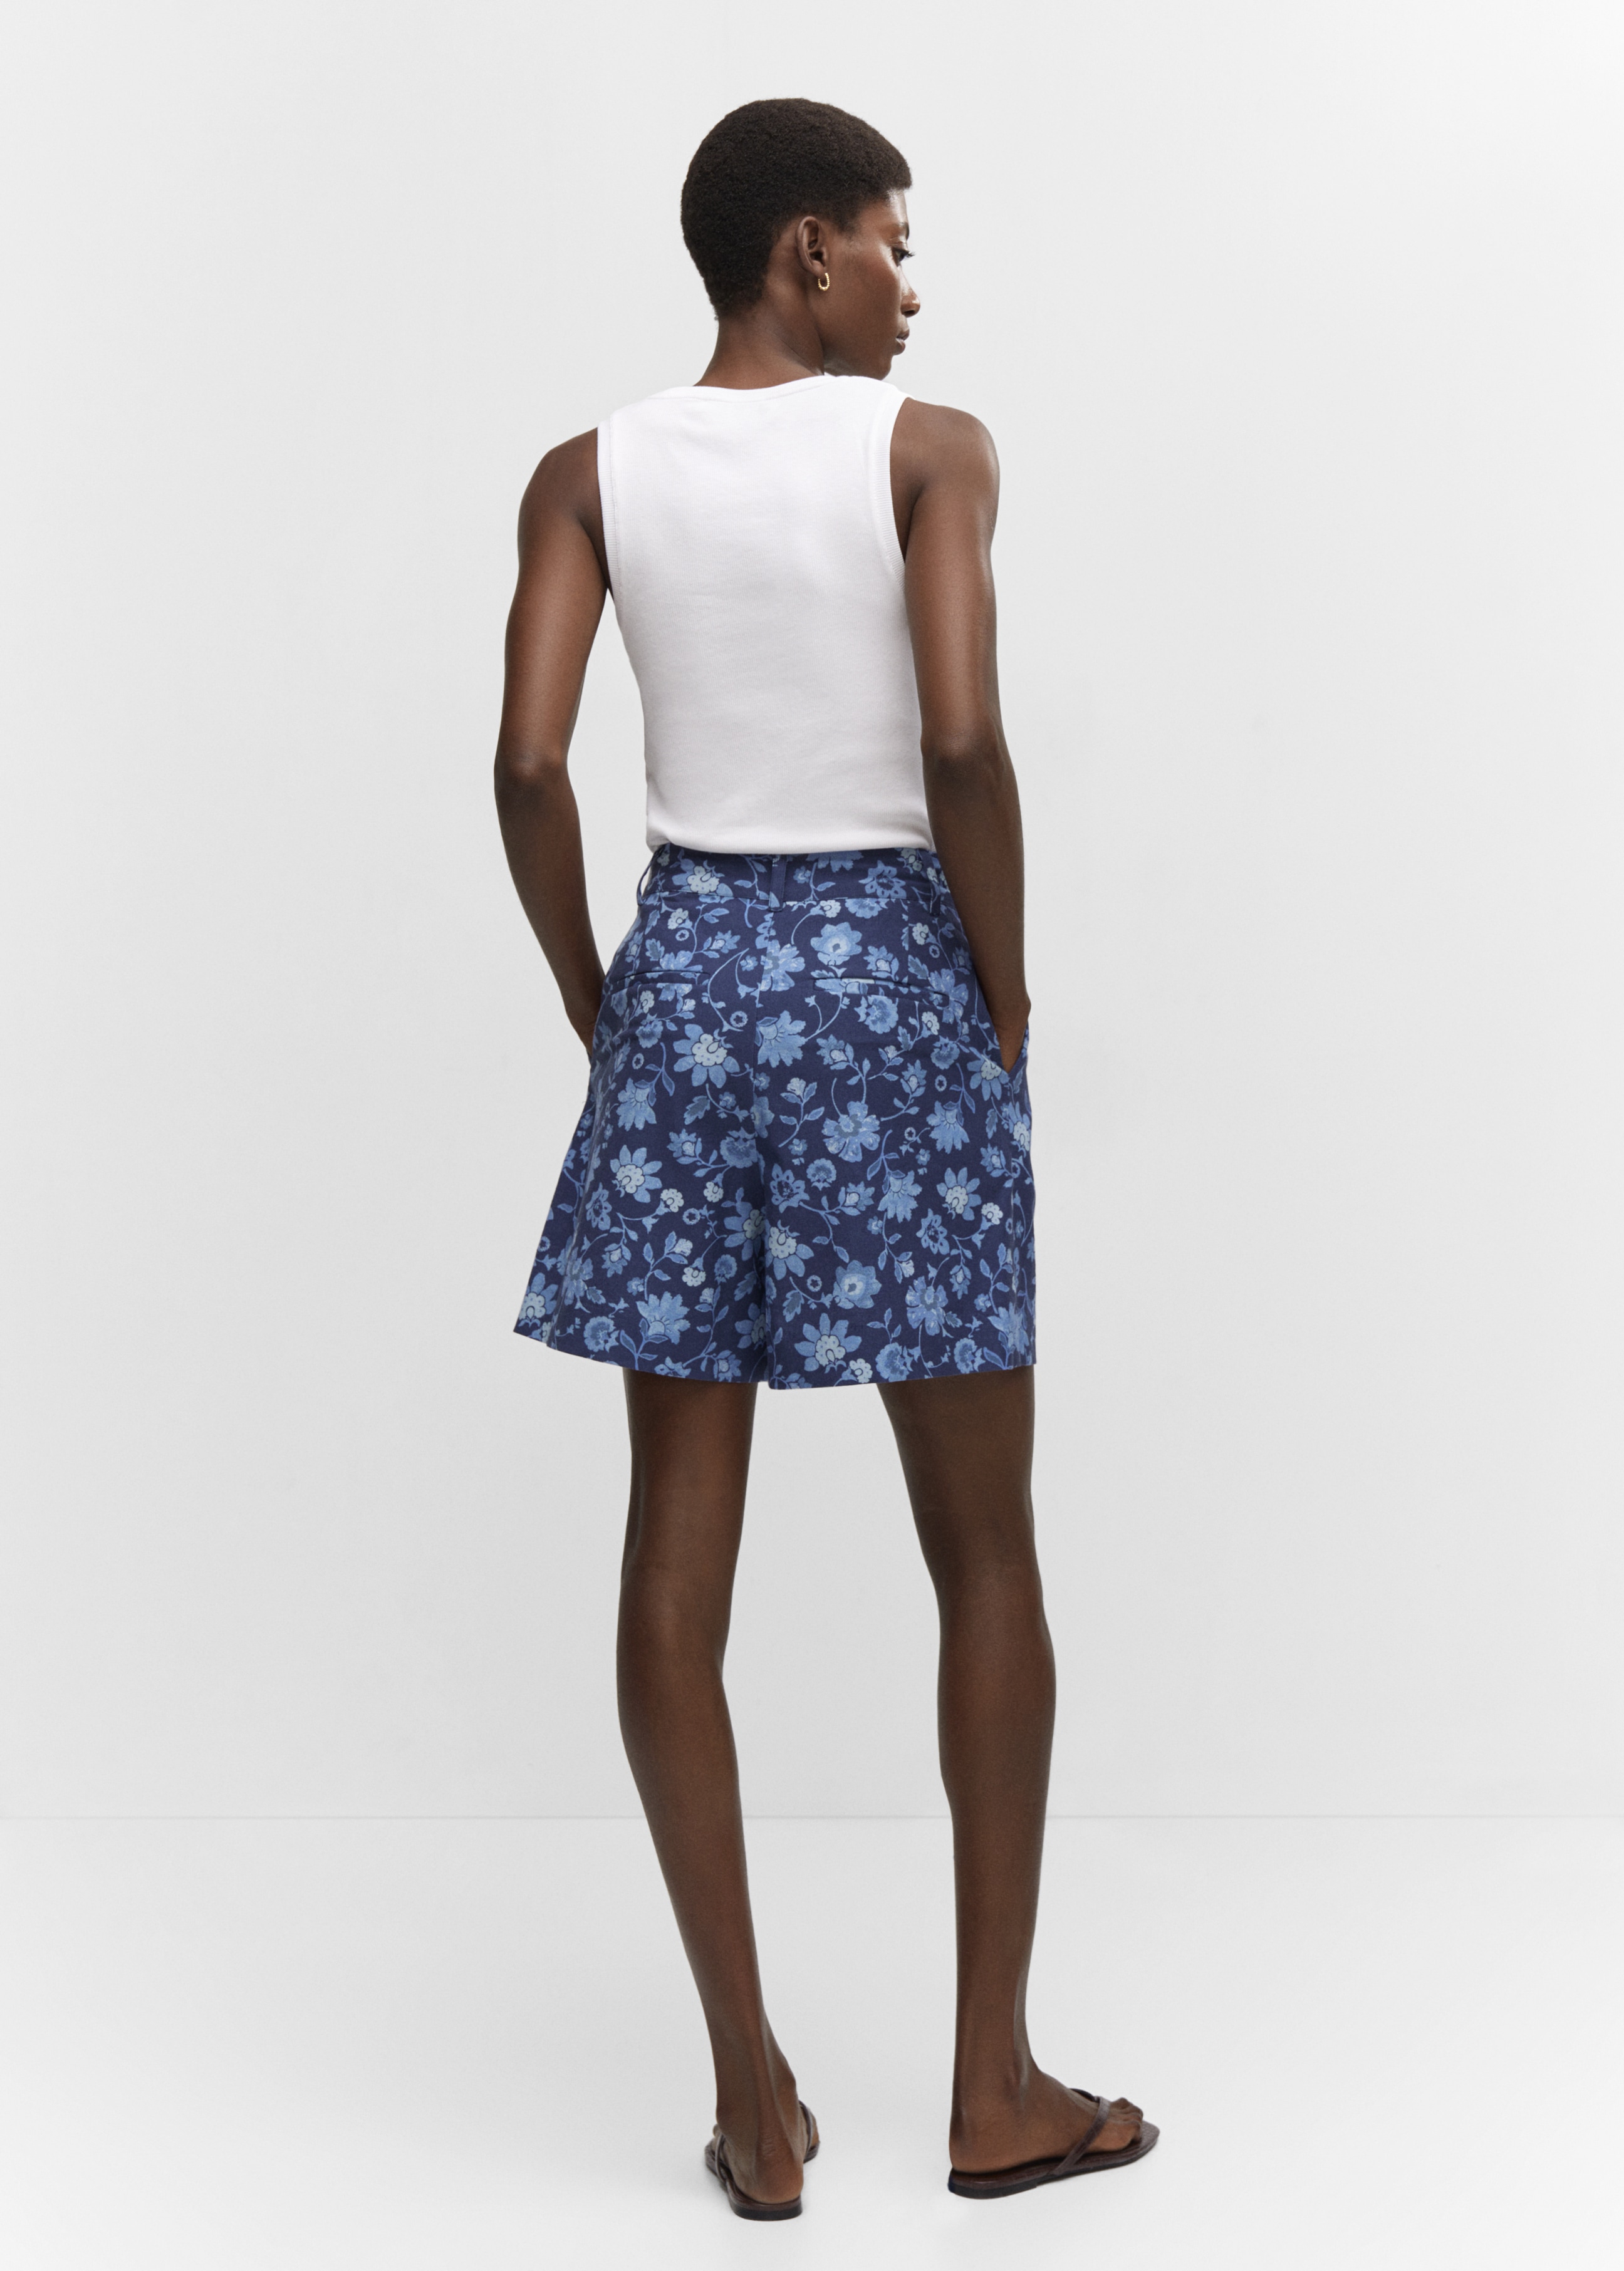 Floral-print shorts - Reverse of the article